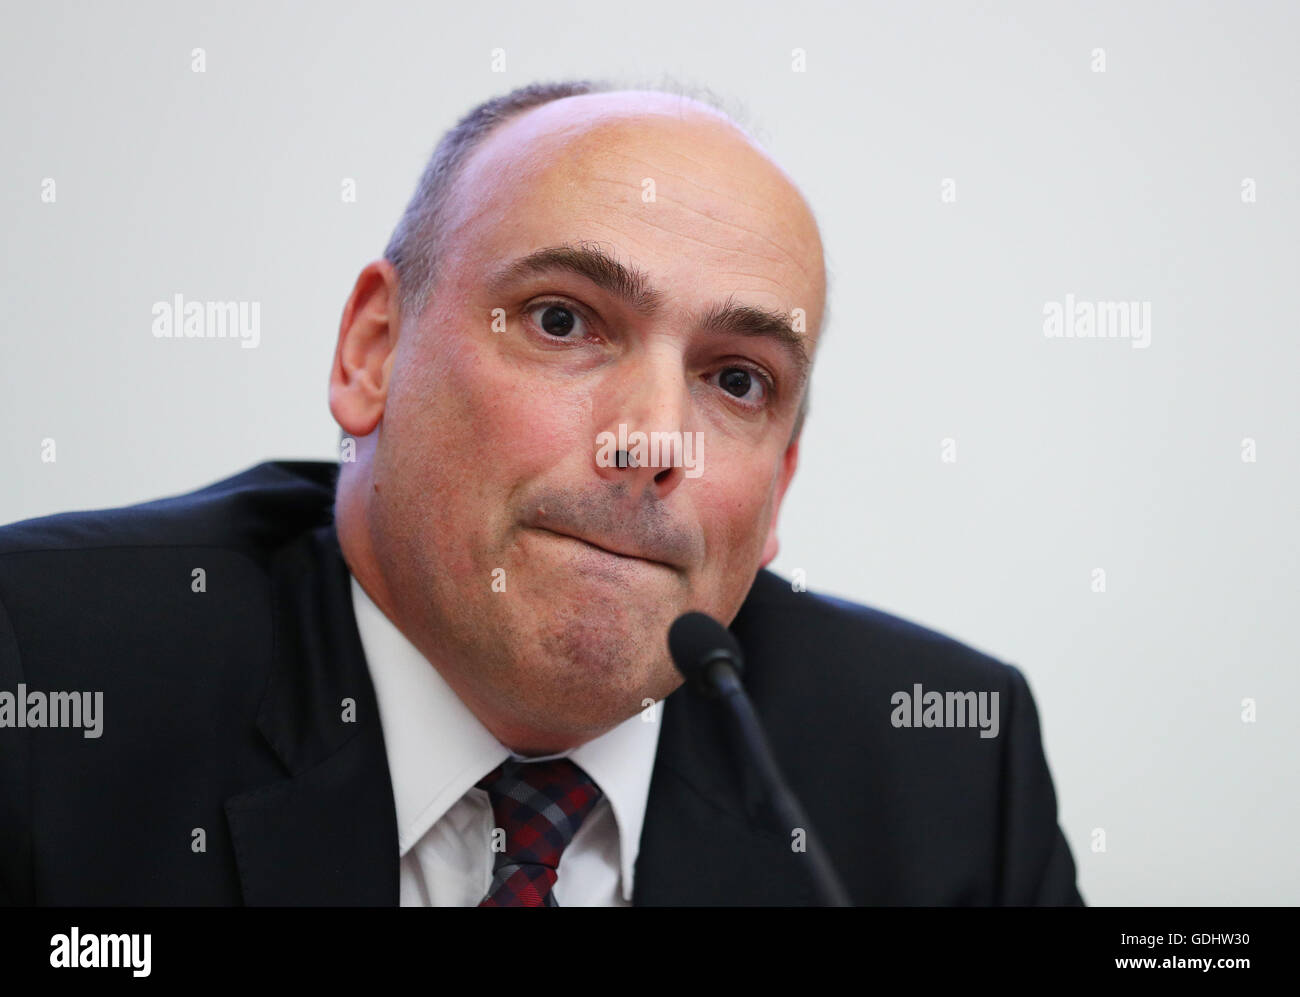 Cologne, Germany. 18th July, 2016. CEO of Hapag-Lloyd AG, Rolf Habben Jansen, speaks at a press conference at company headquarters in Cologne, Germany, 18 July 2016. After months of negotiations, the merger between Hapag-Lloyd and Arab shipping company UASC is a done deal. Photo: CHRISTIAN CHARISIUS/dpa/Alamy Live News Stock Photo